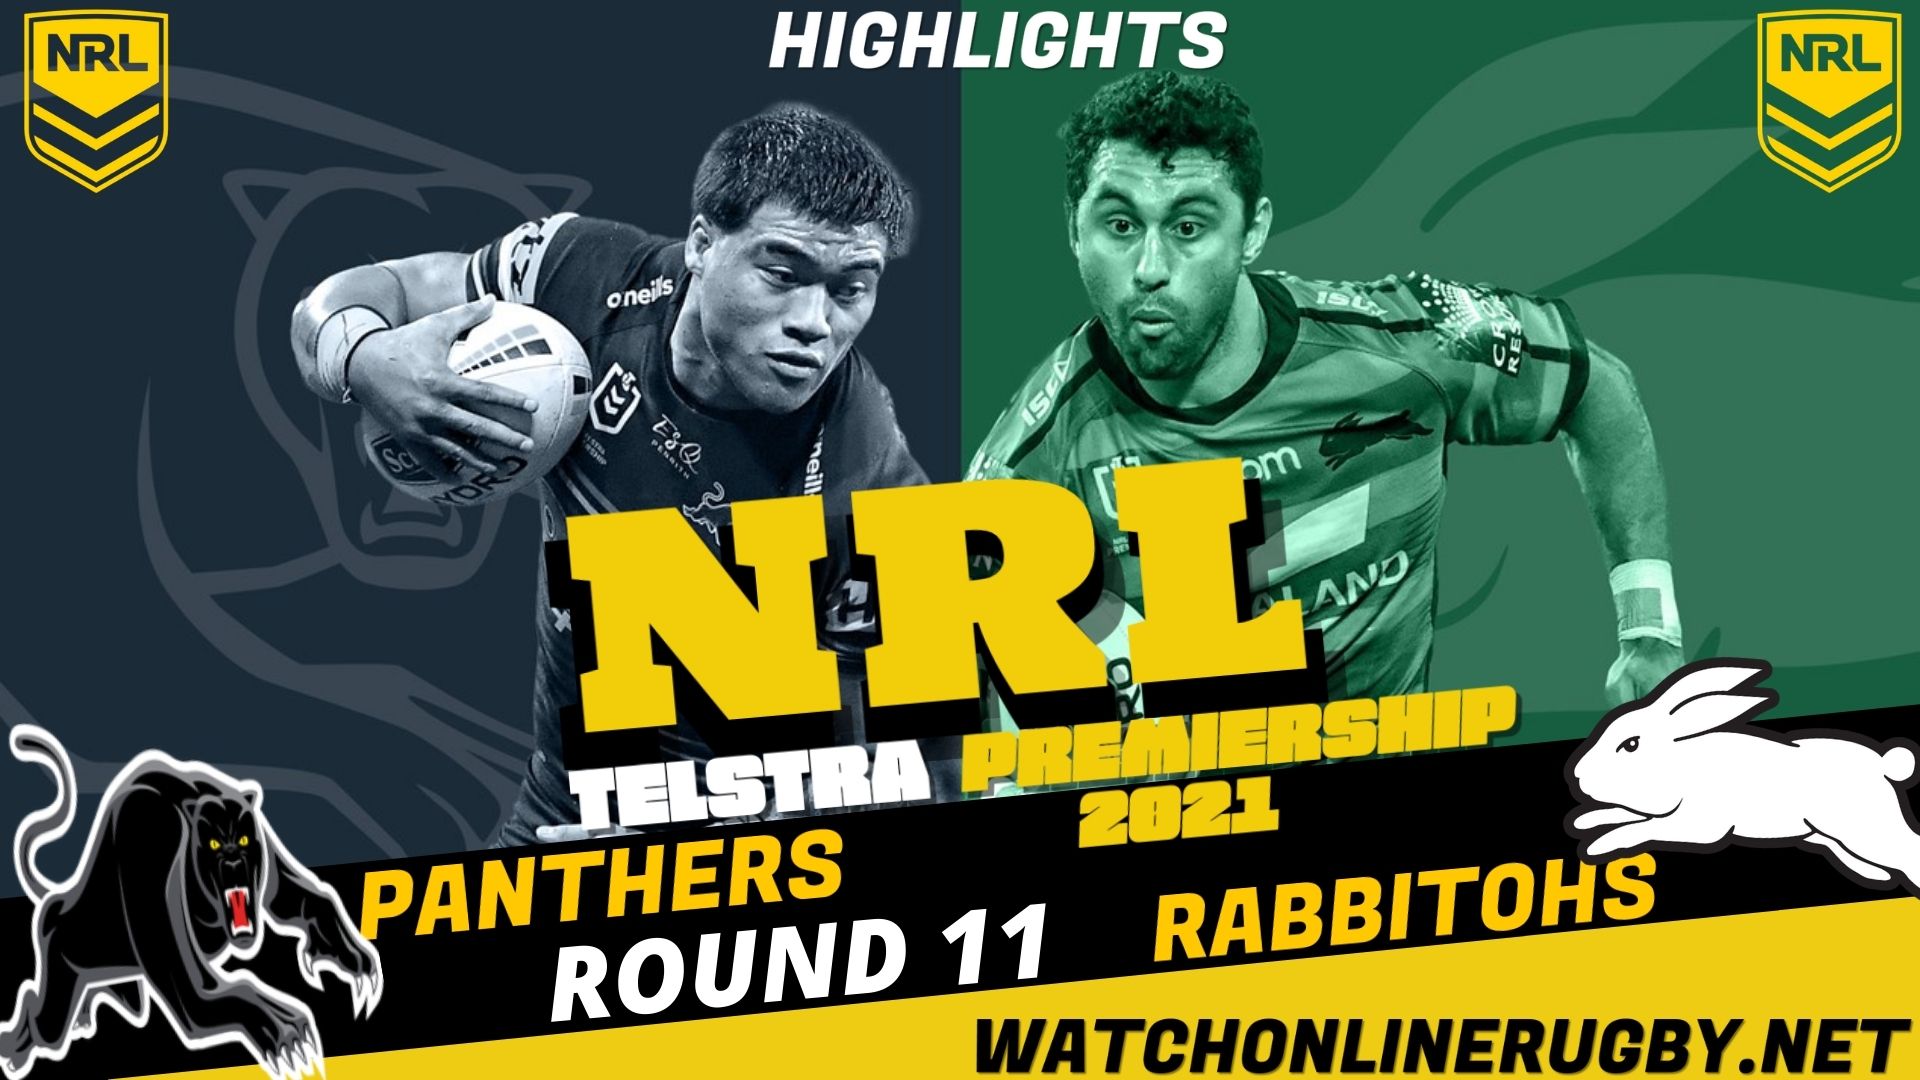 Rabbitohs Vs Panthers Highlights RD 11 NRL Rugby